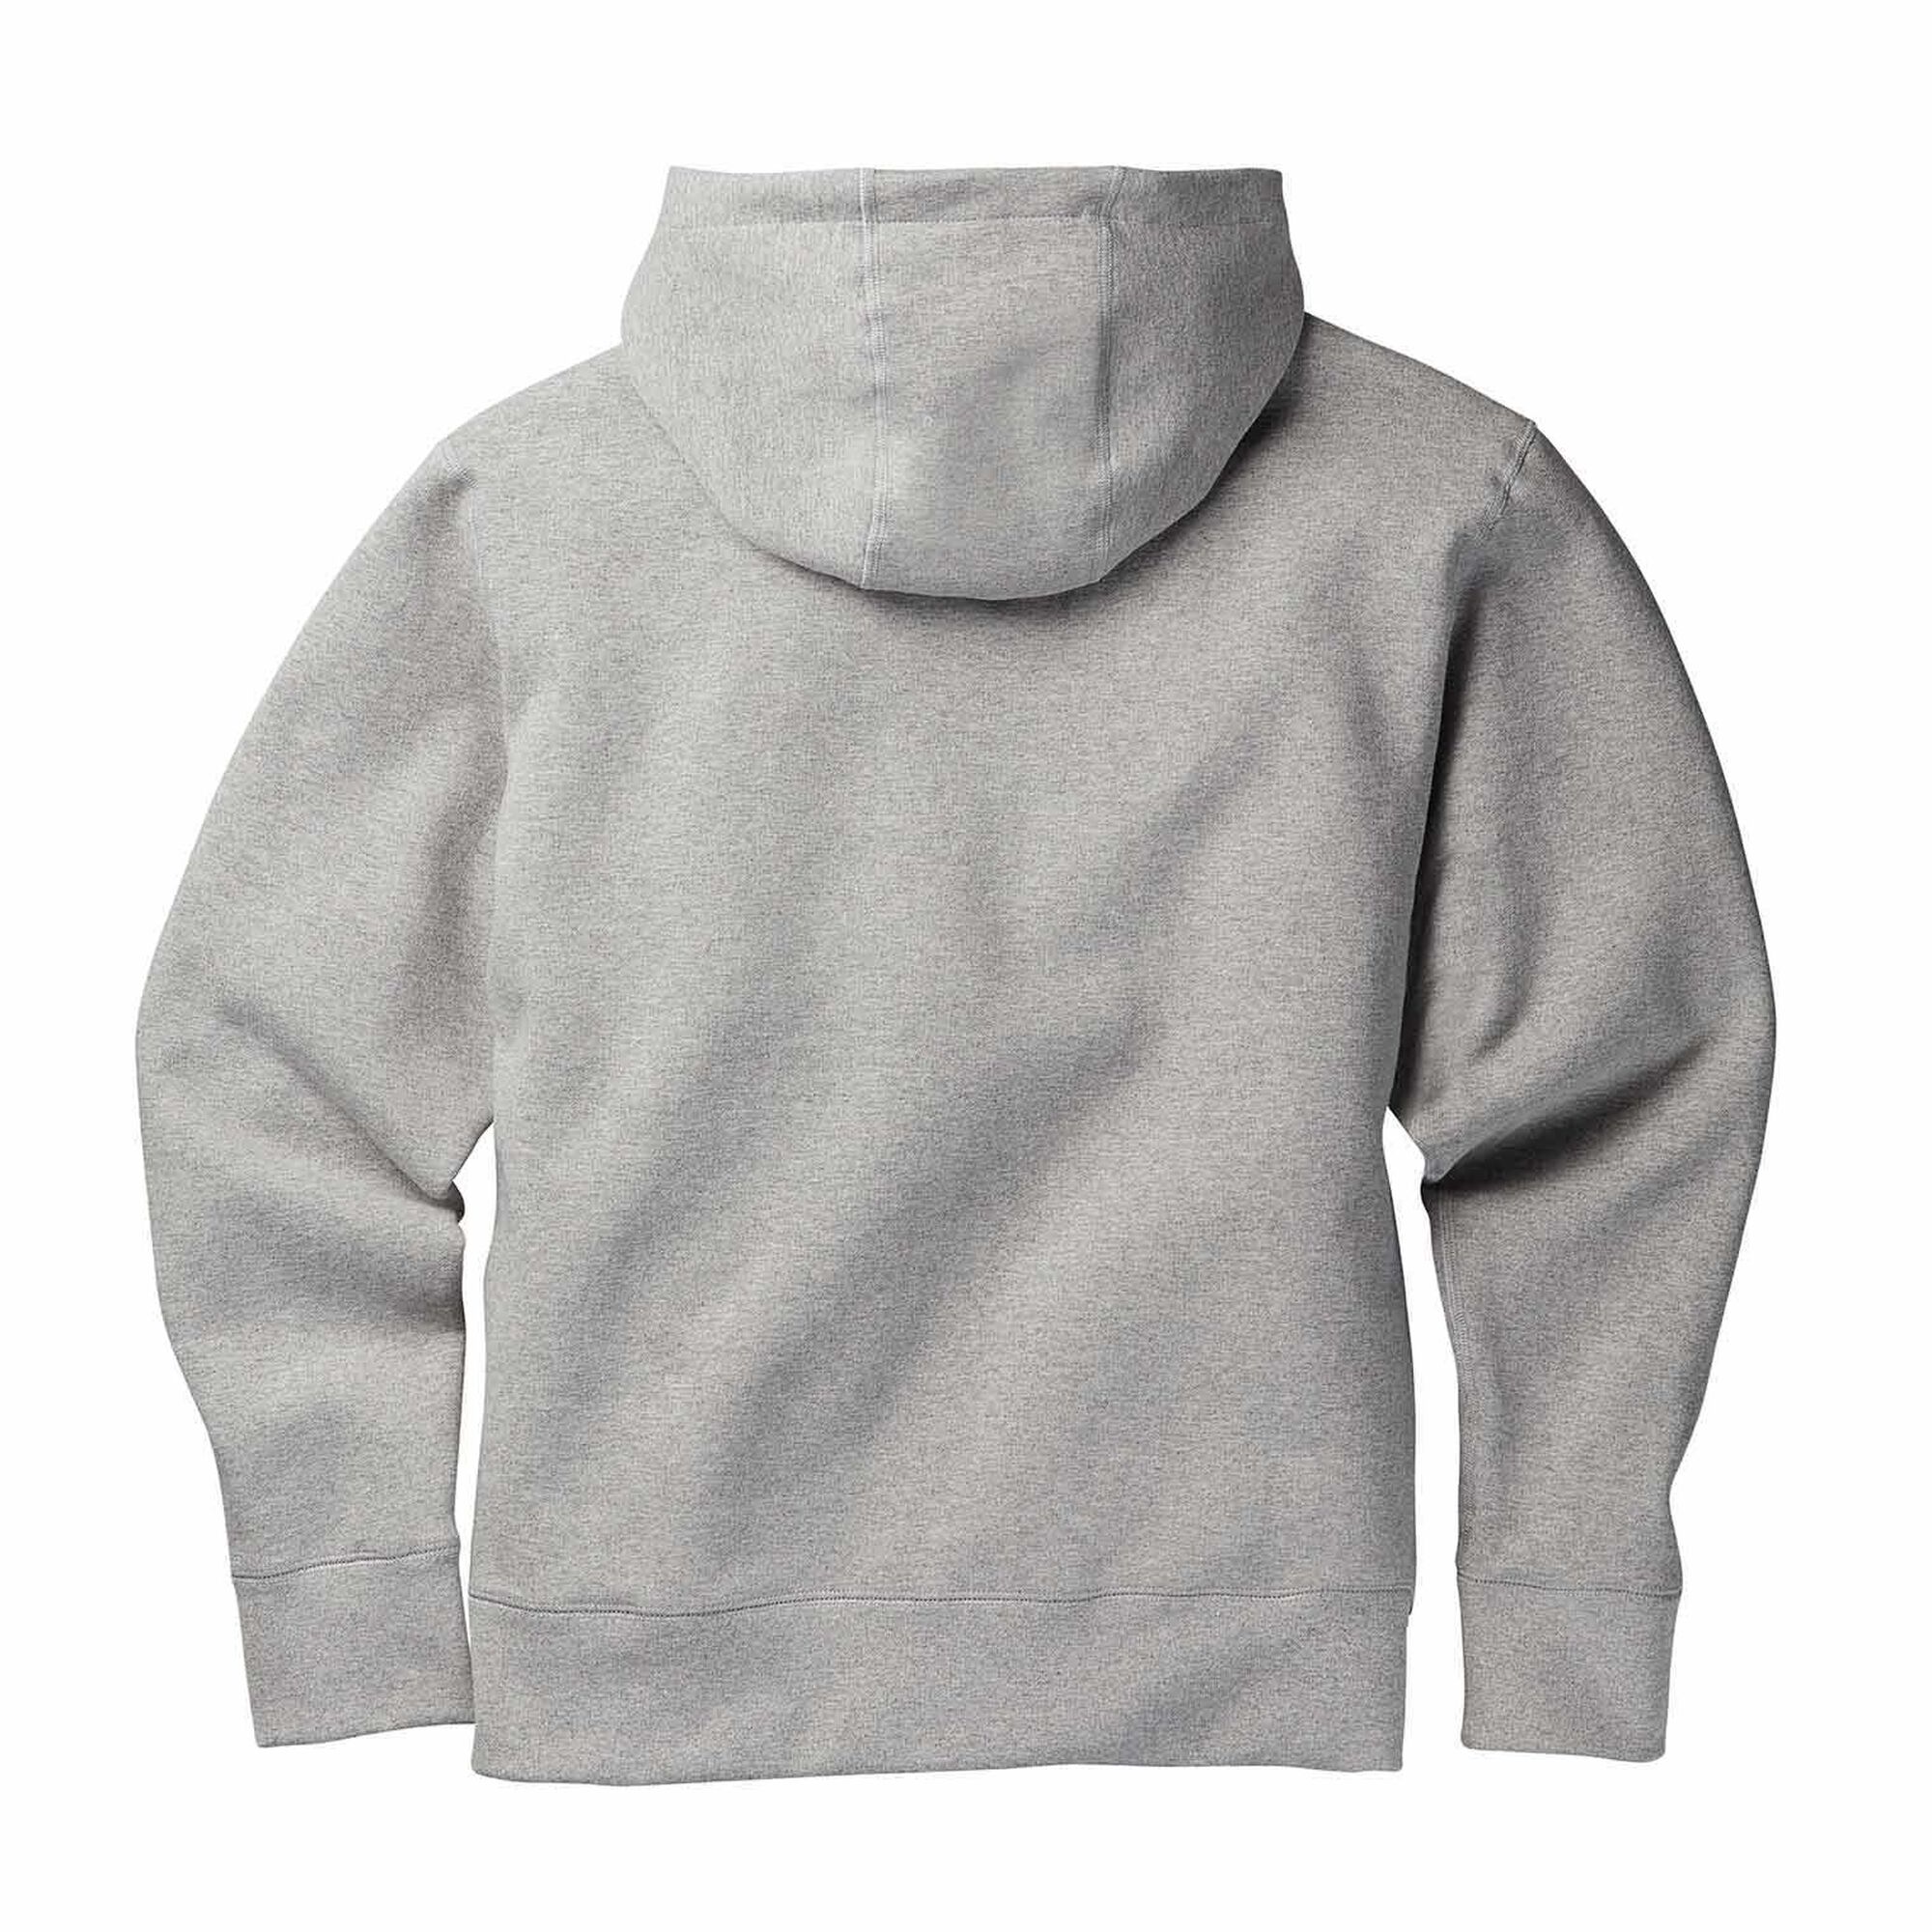 Personalised MomentsMade® Embroidered Hoodies, Sweatshirts & Jackets –  MomentsMade.co